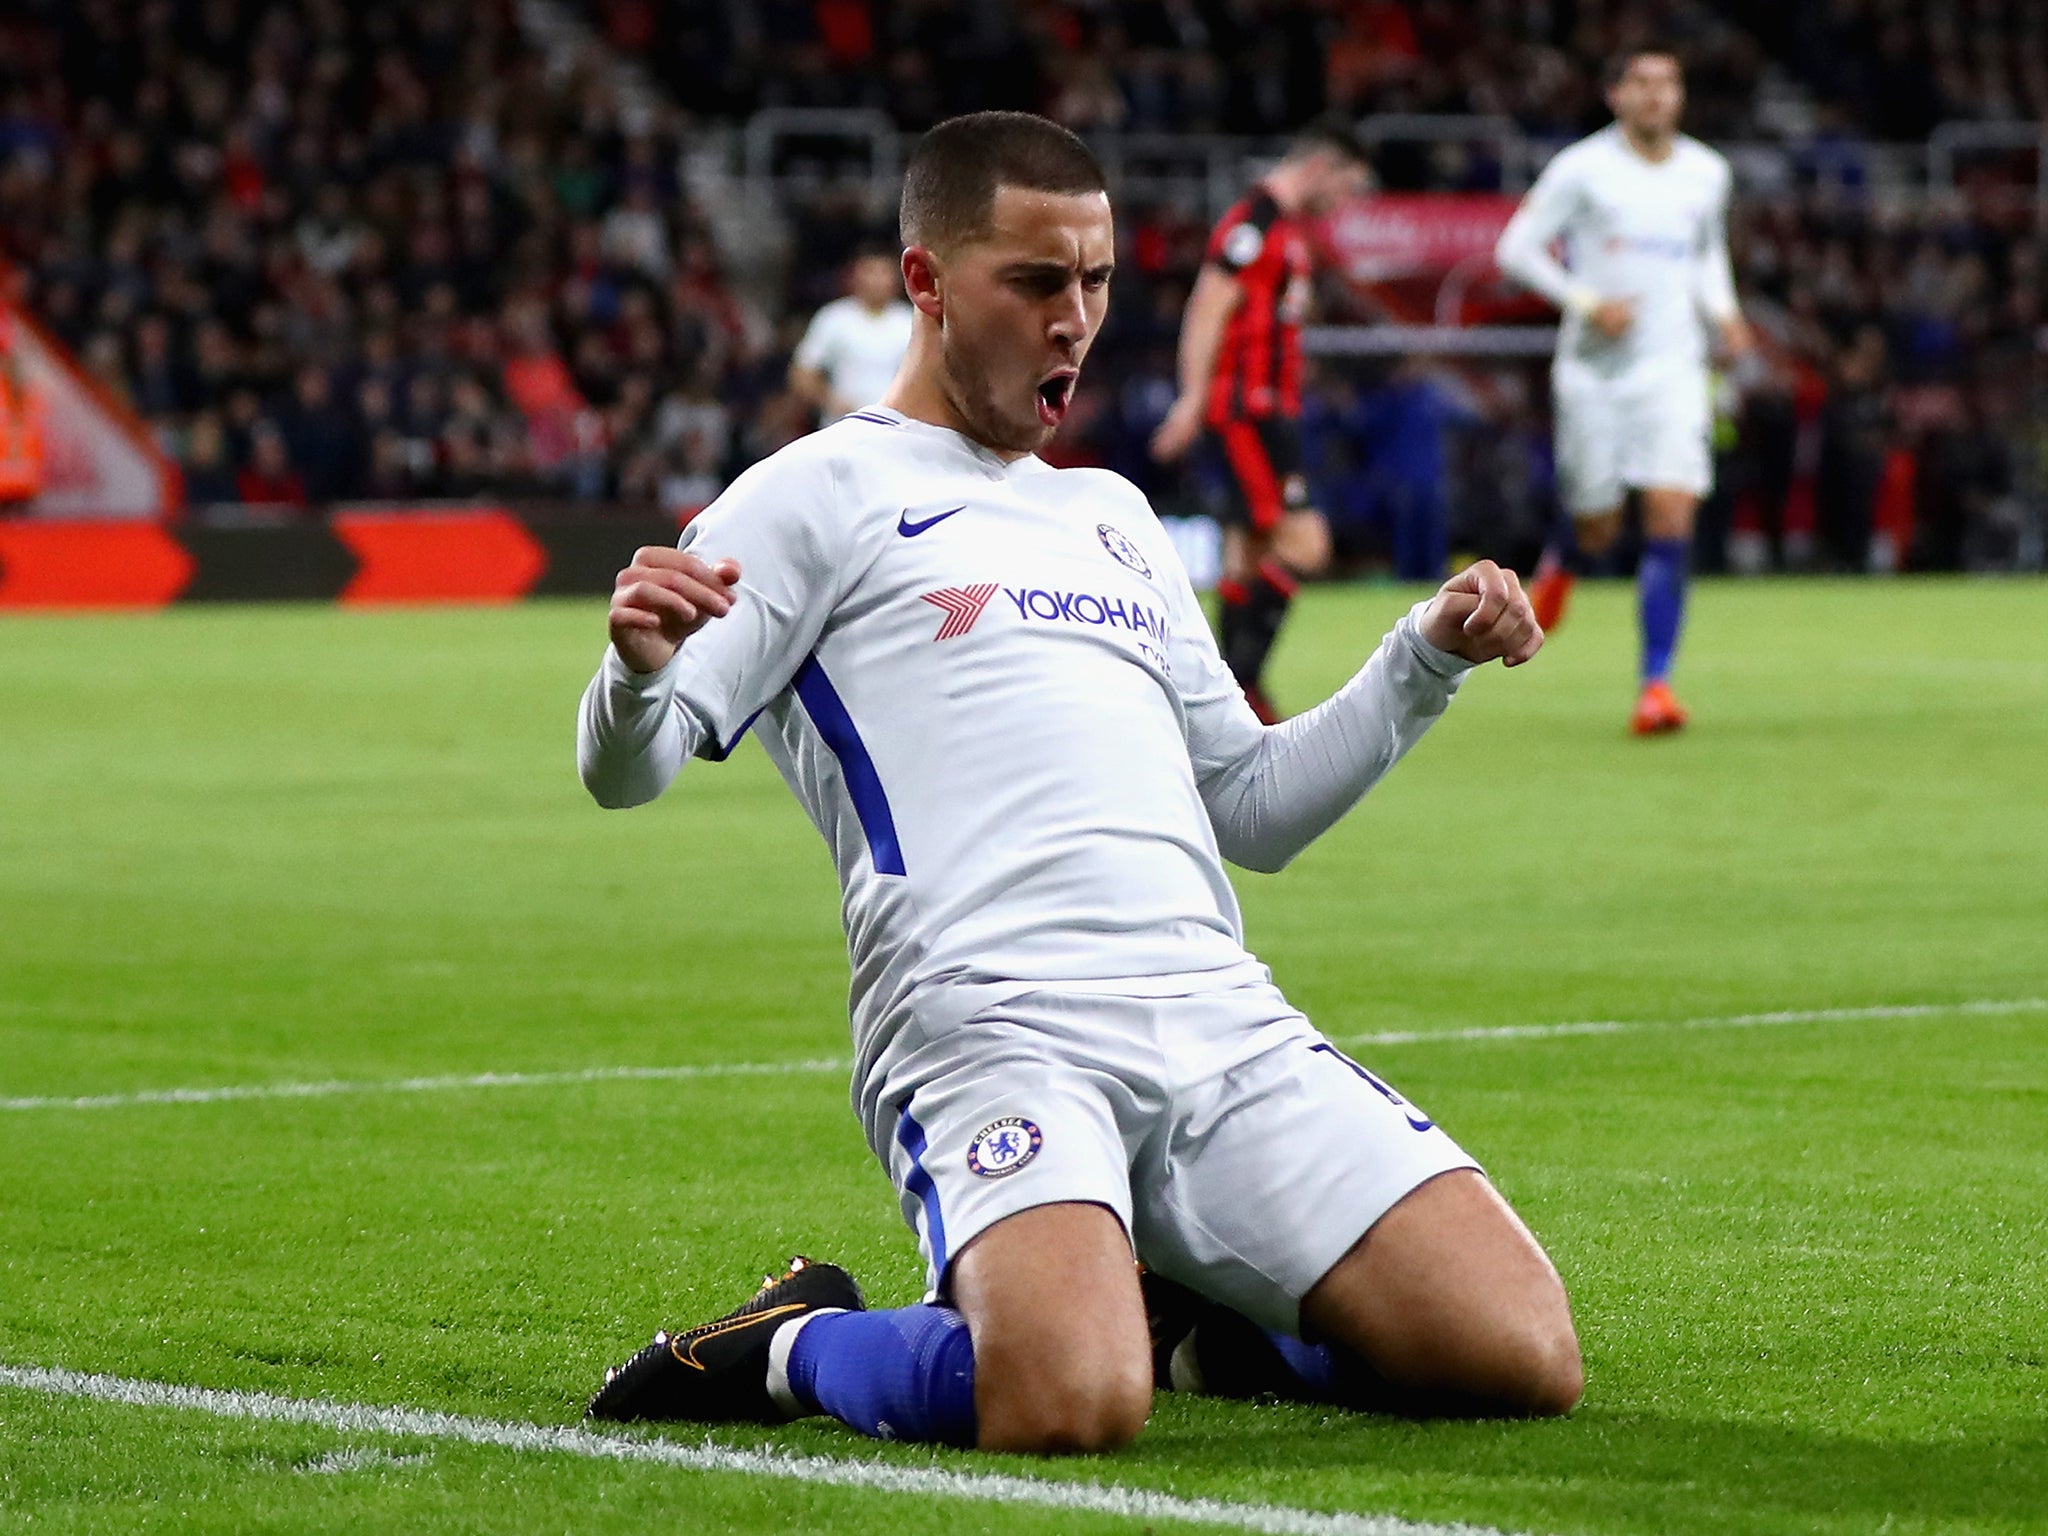 Antonio Conte&apos;s frustrating week ends in relief as Eden Hazard secures hard-fought victory over Bournemouth